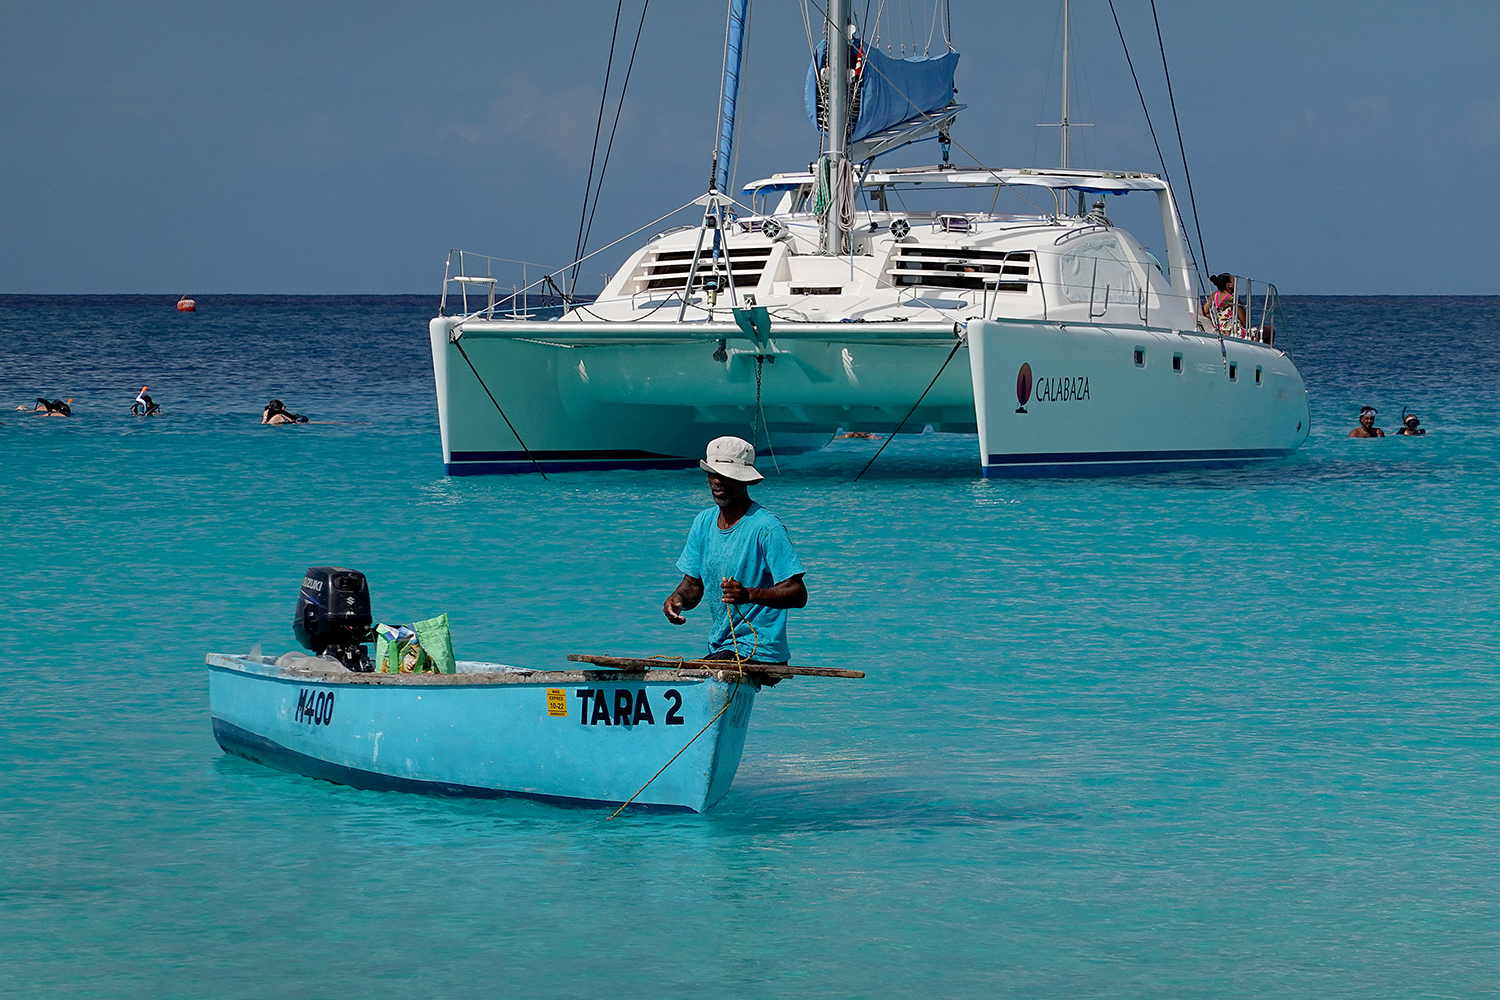 A man fishes from a small boat in front of a larger yacht in the turquoise waters off Bridgetown, Barbados, in 2021.